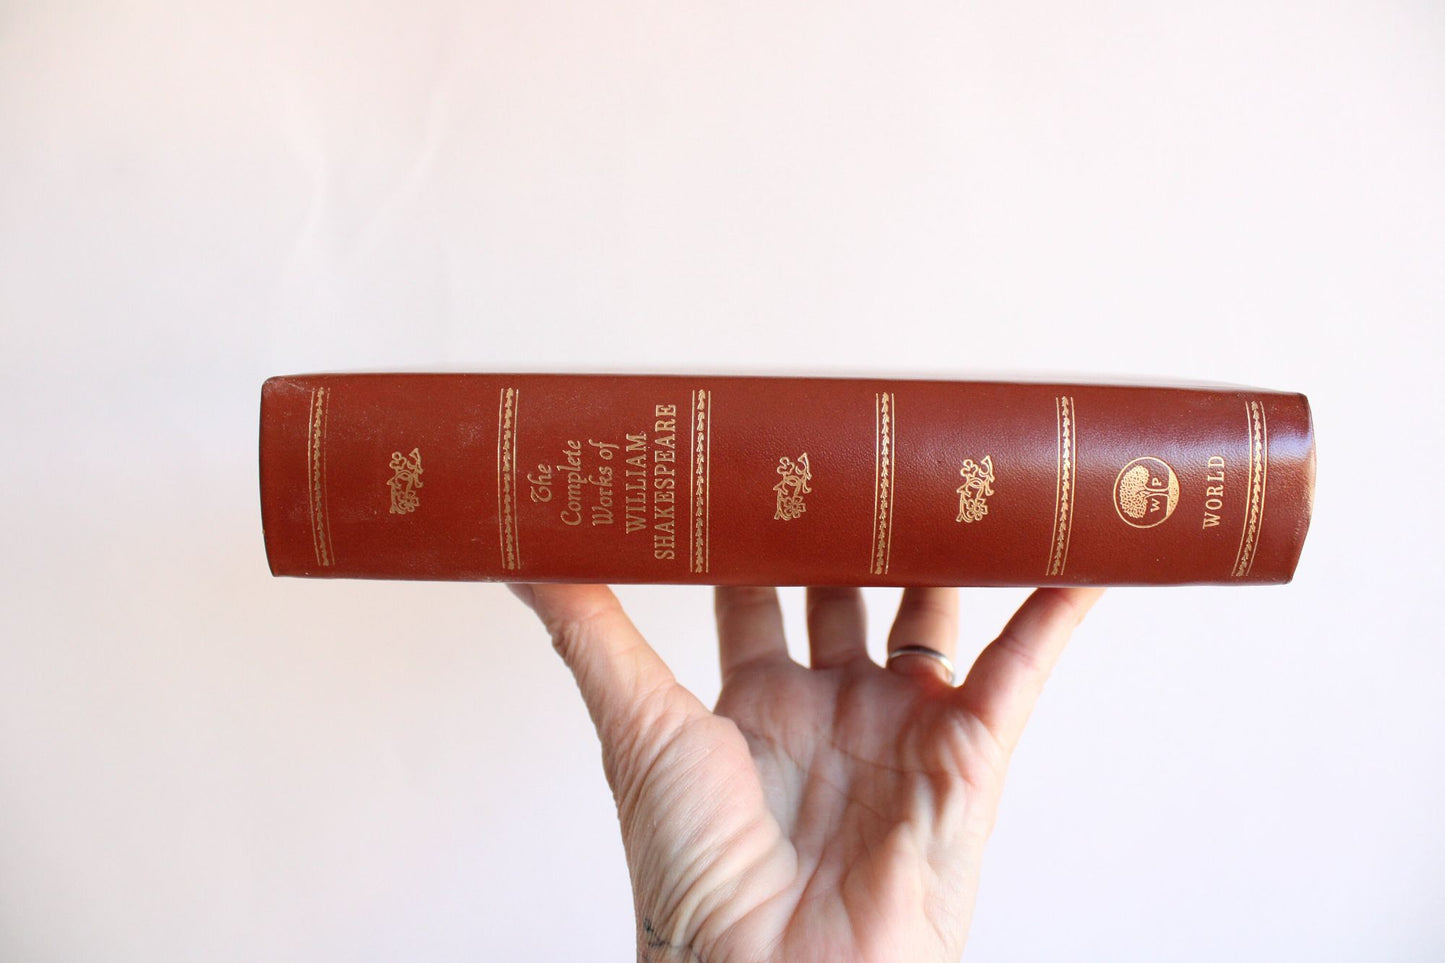 Vintage 1960s Book, The Complete Works of William Shakespeare, Leather Bound